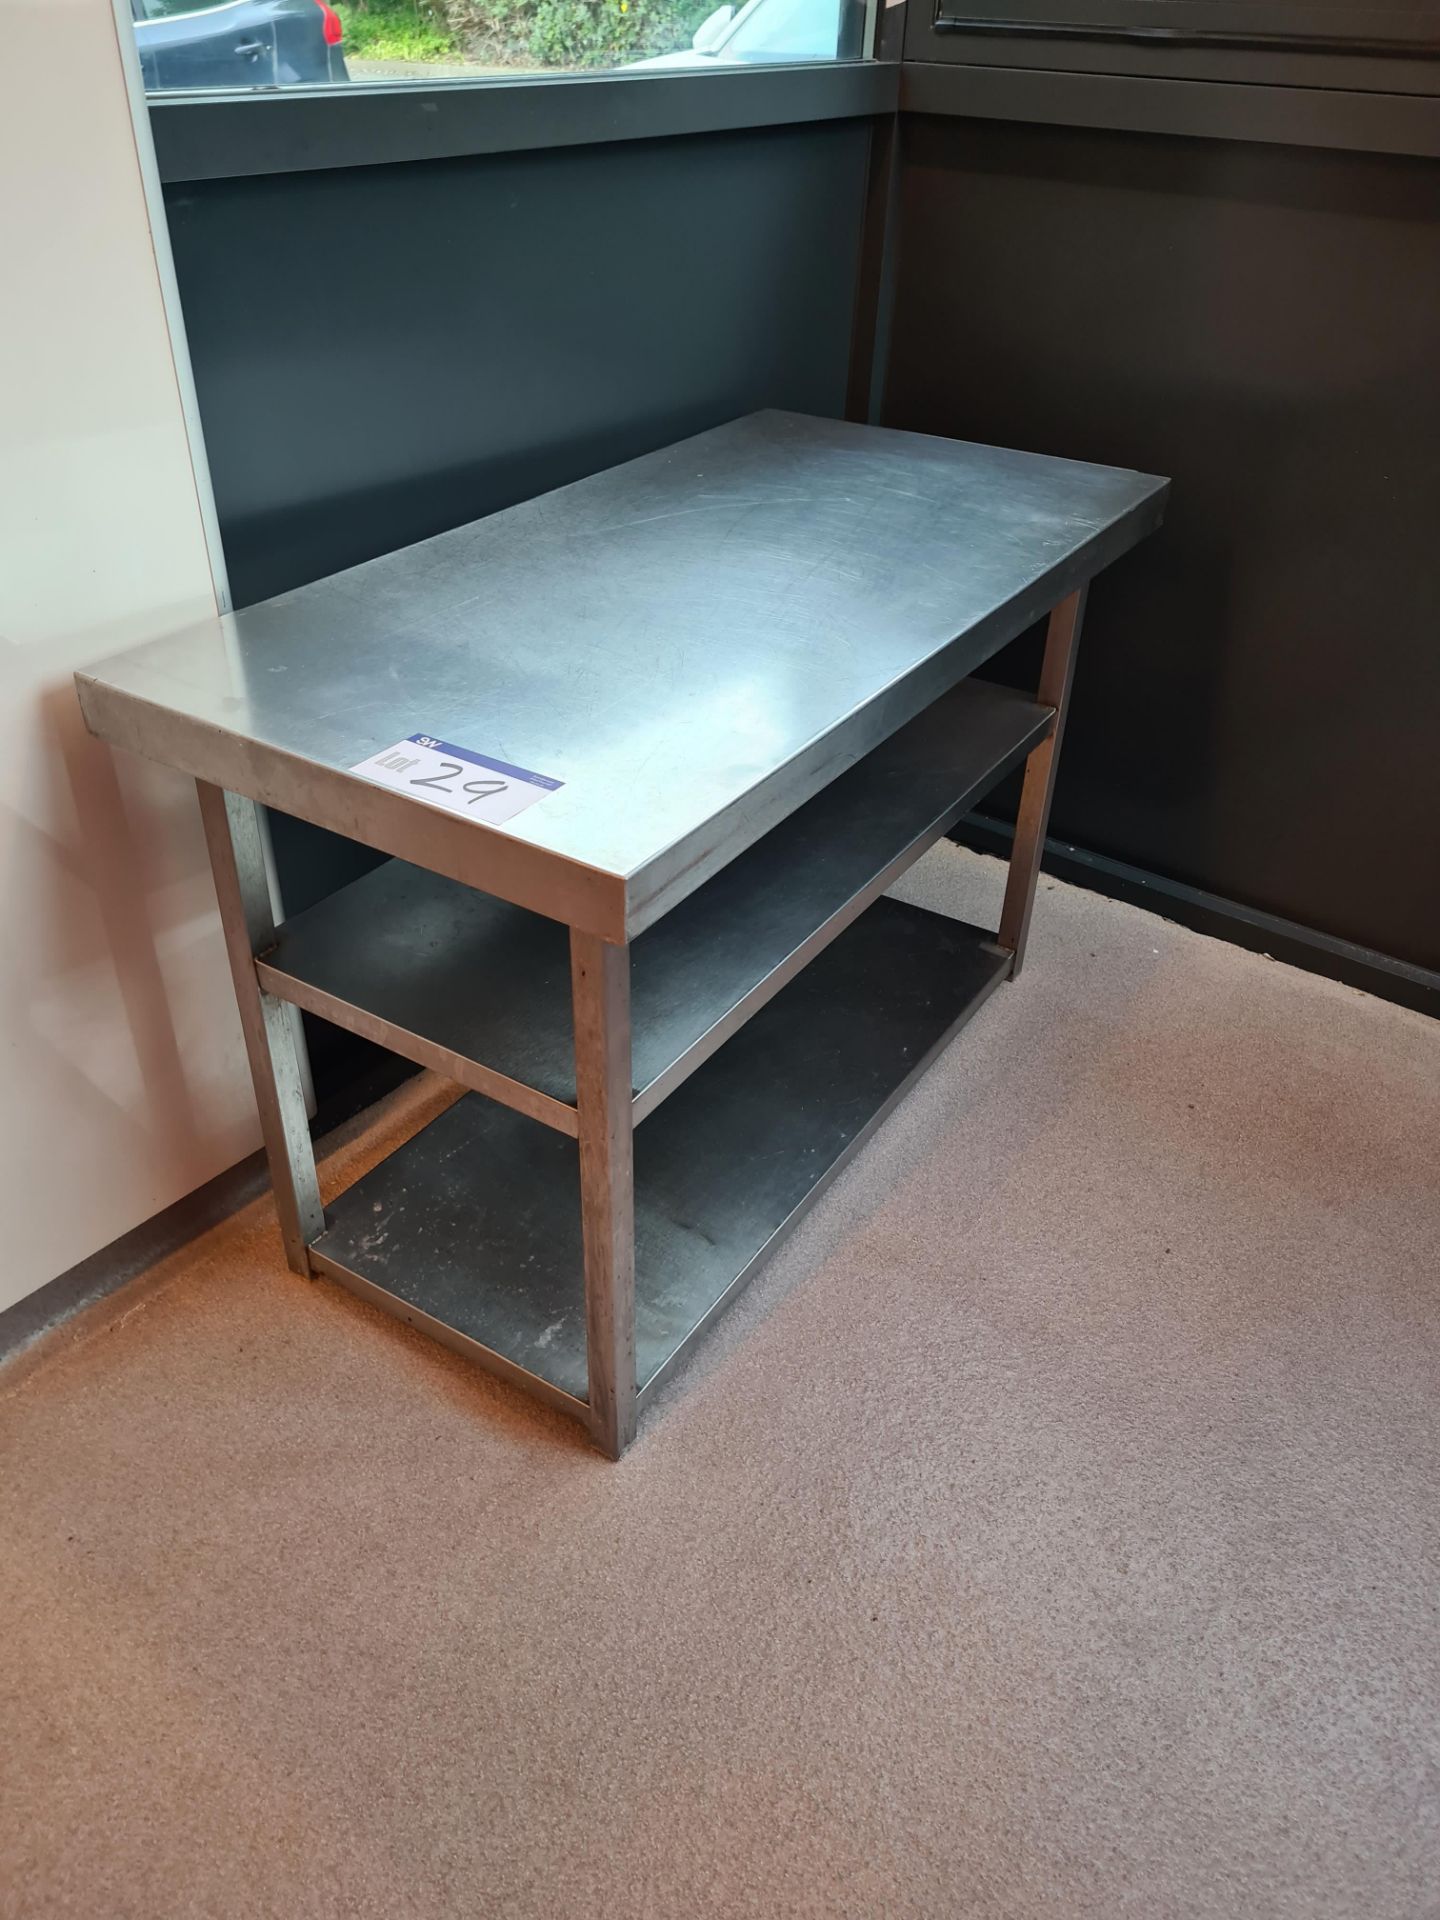 Stainless Steel Three Tier Side Table, Approx. 1.05m (L) x 0.5m (W) x 0.65m (H)